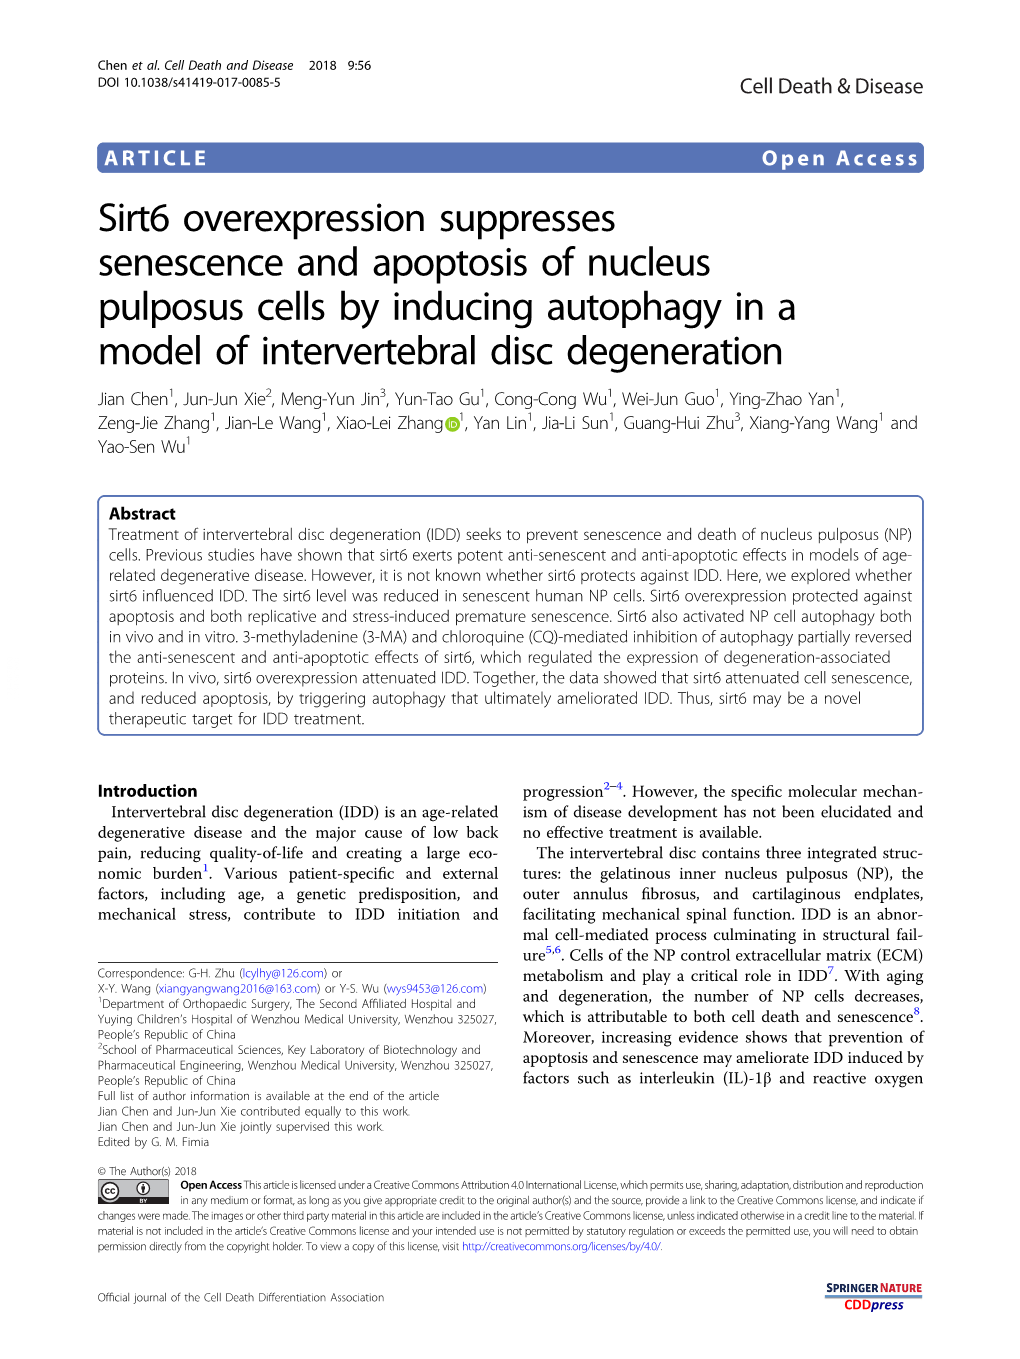 Sirt6 Overexpression Suppresses Senescence and Apoptosis Of